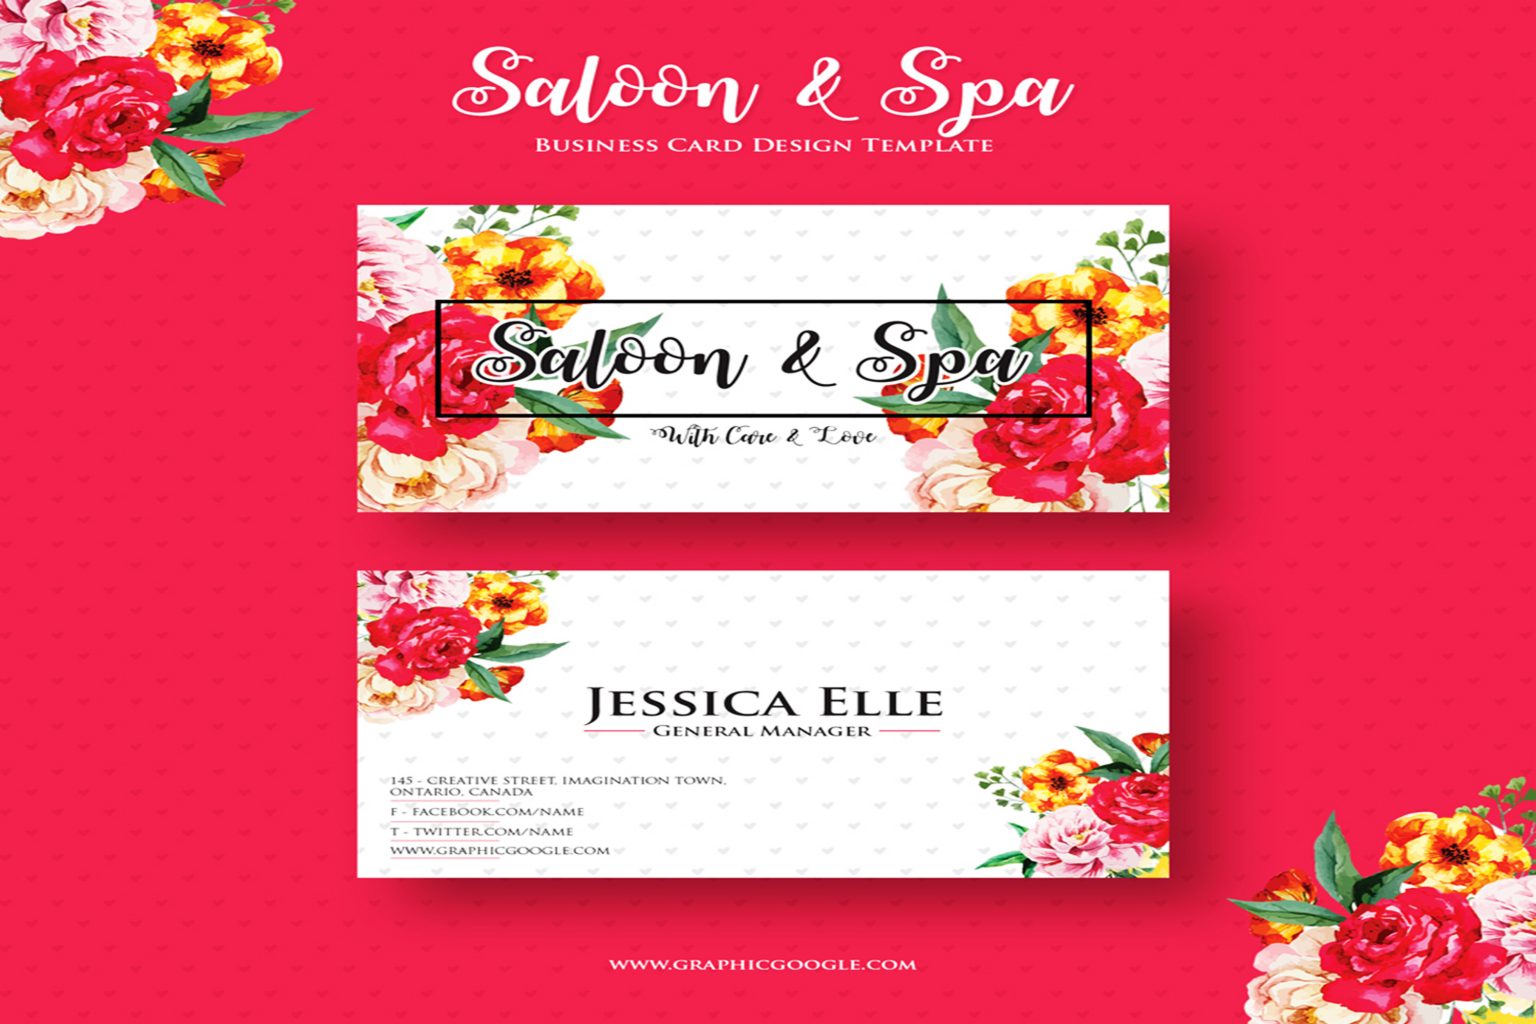 Saloon & Spa Business Card Design Template Free Download